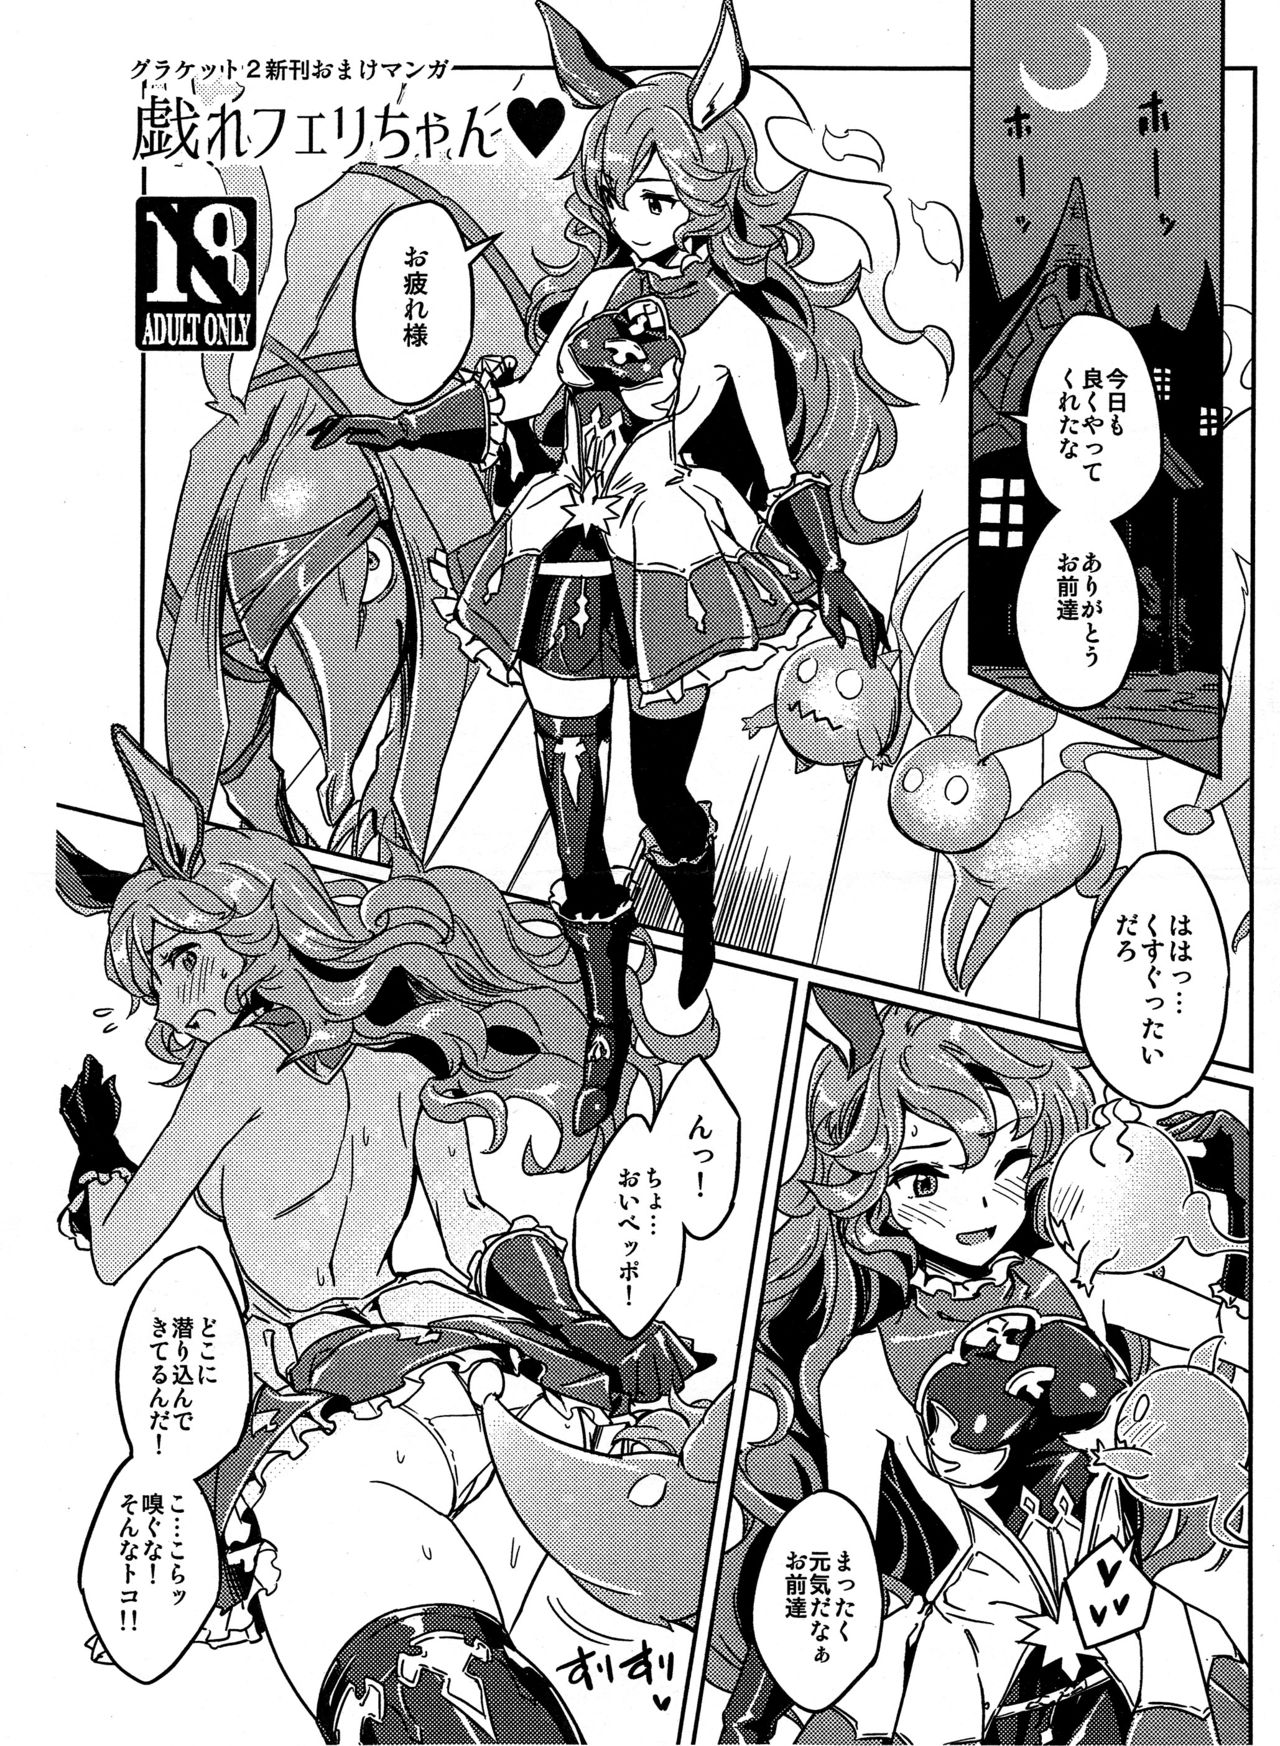 (Graket 2) [HECHOCHO (ABO)] Tawamure Ferry-chan (Granblue Fantasy) page 1 full